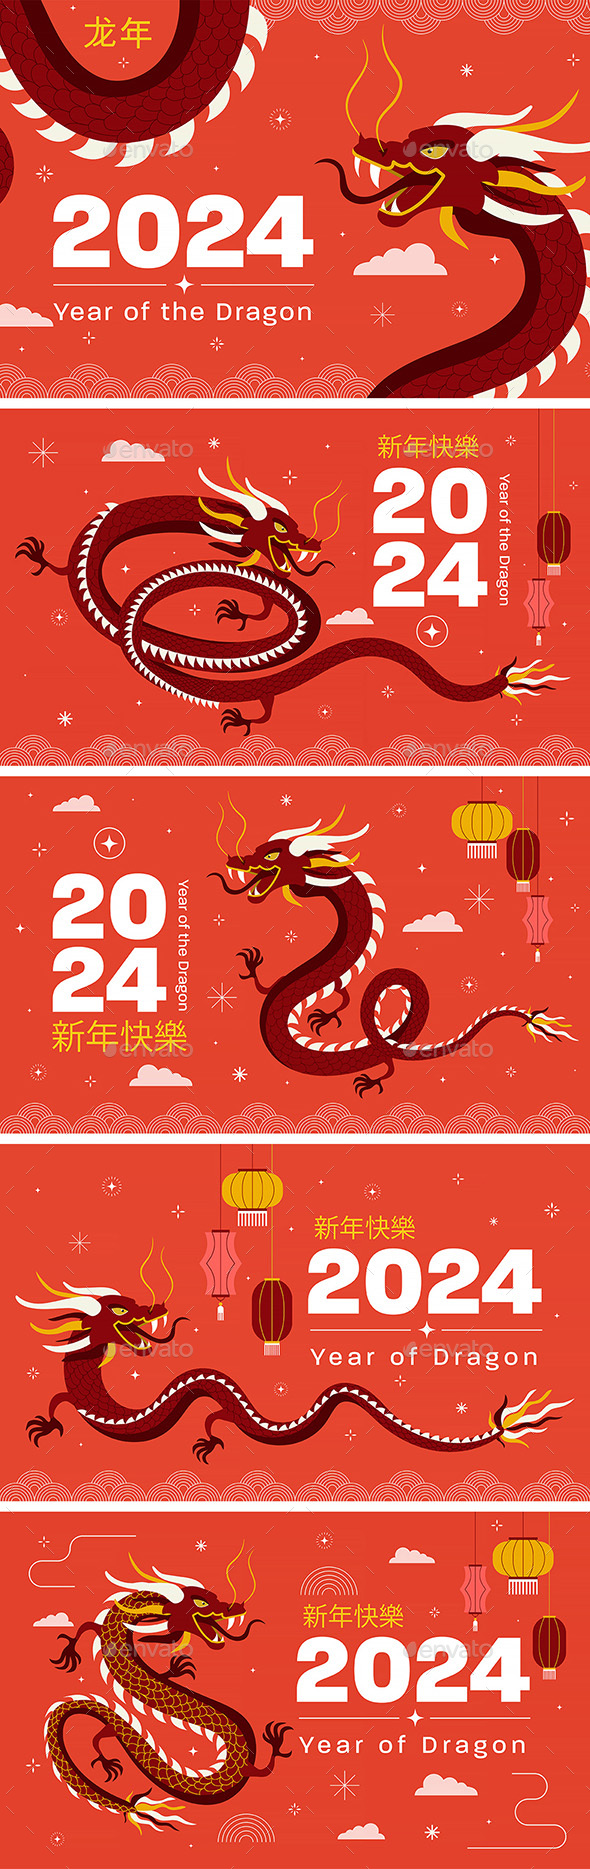 [DOWNLOAD]Chinese New Year 2024